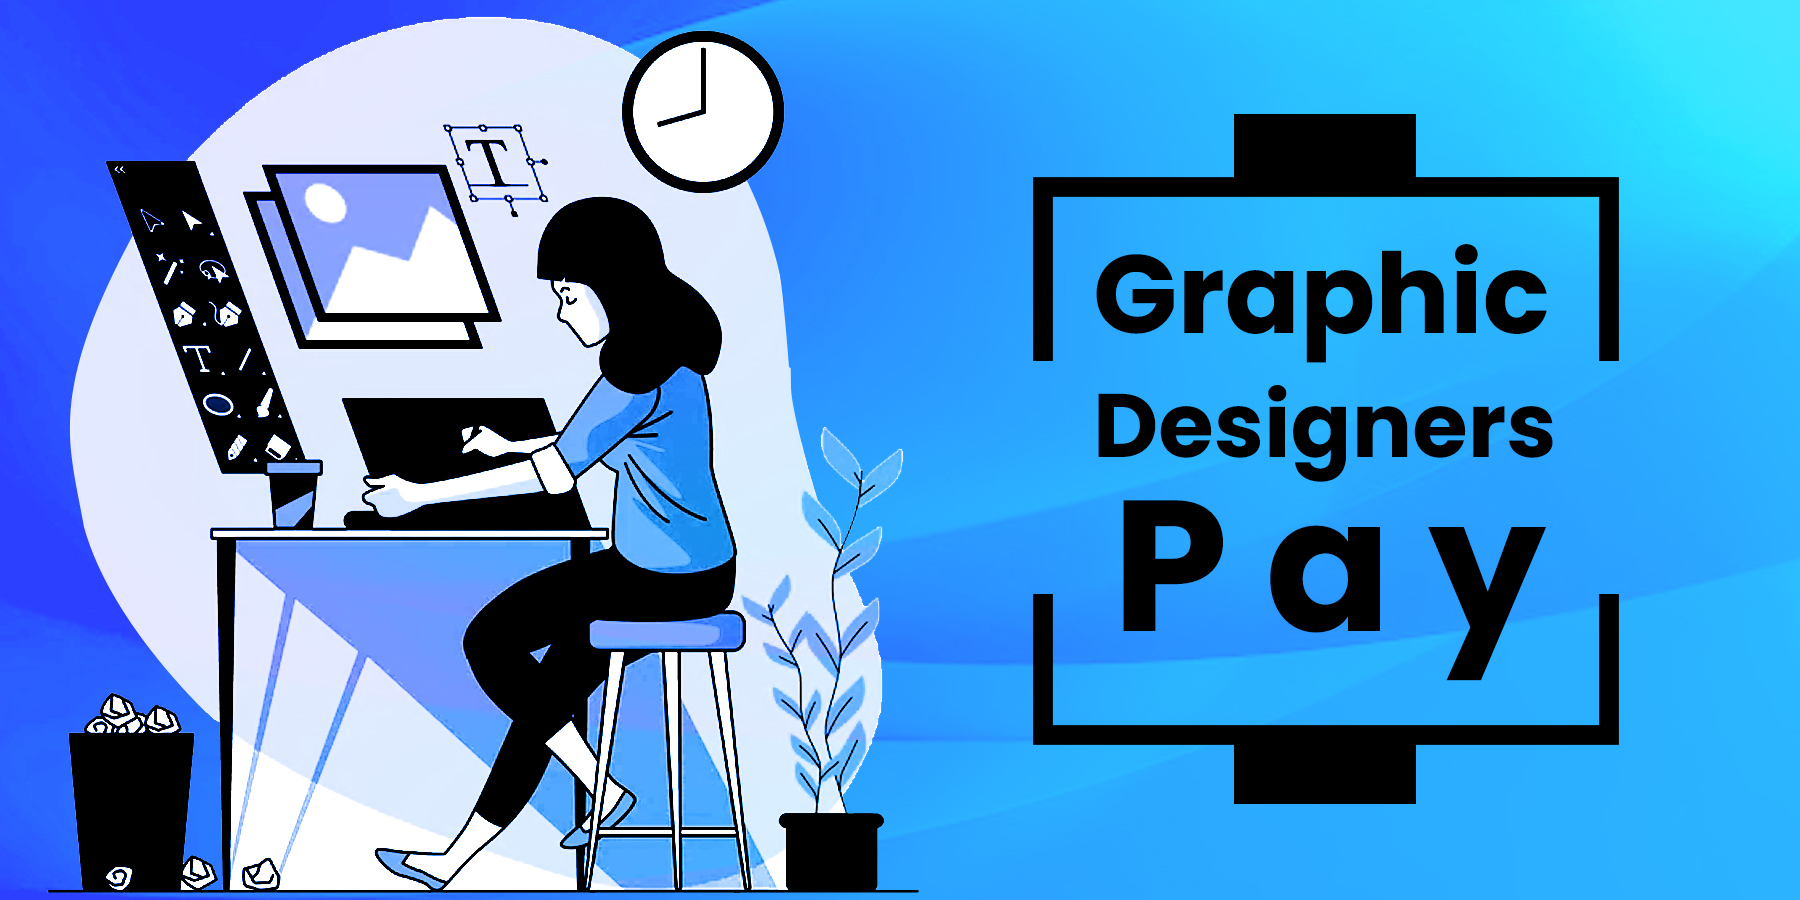 How Much Should You Pay a Graphic Designer?